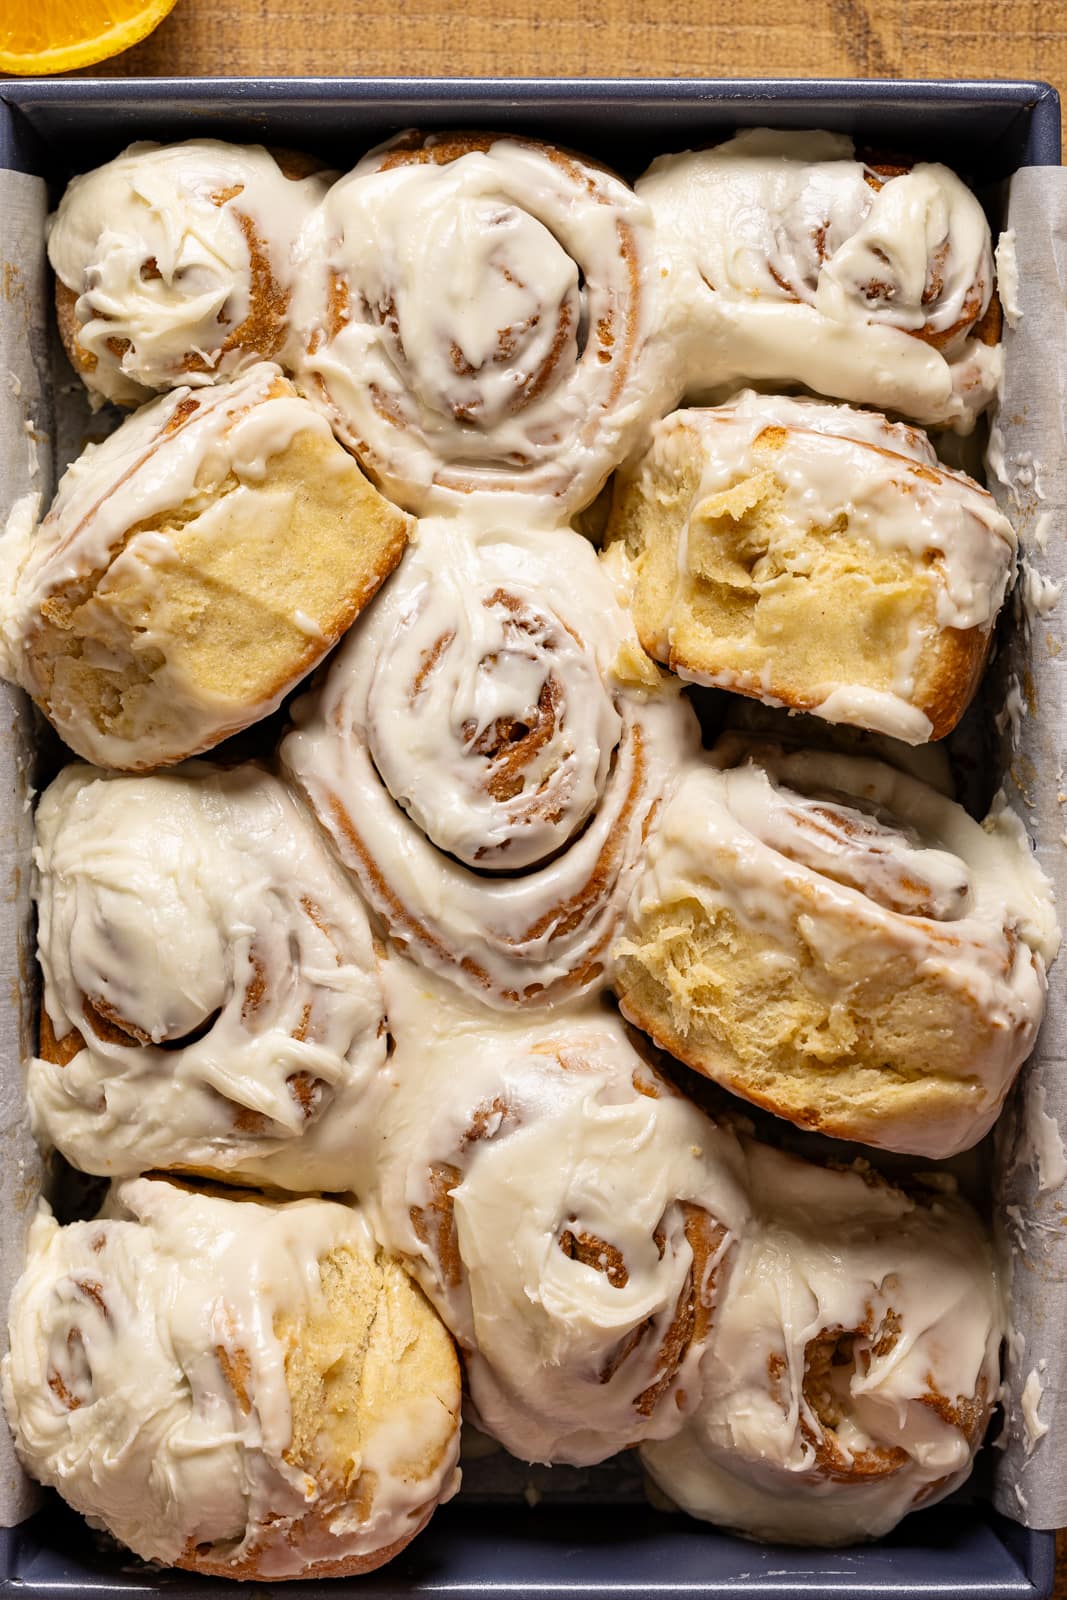 Cinnamon rolls in a baking dish with some turned over.